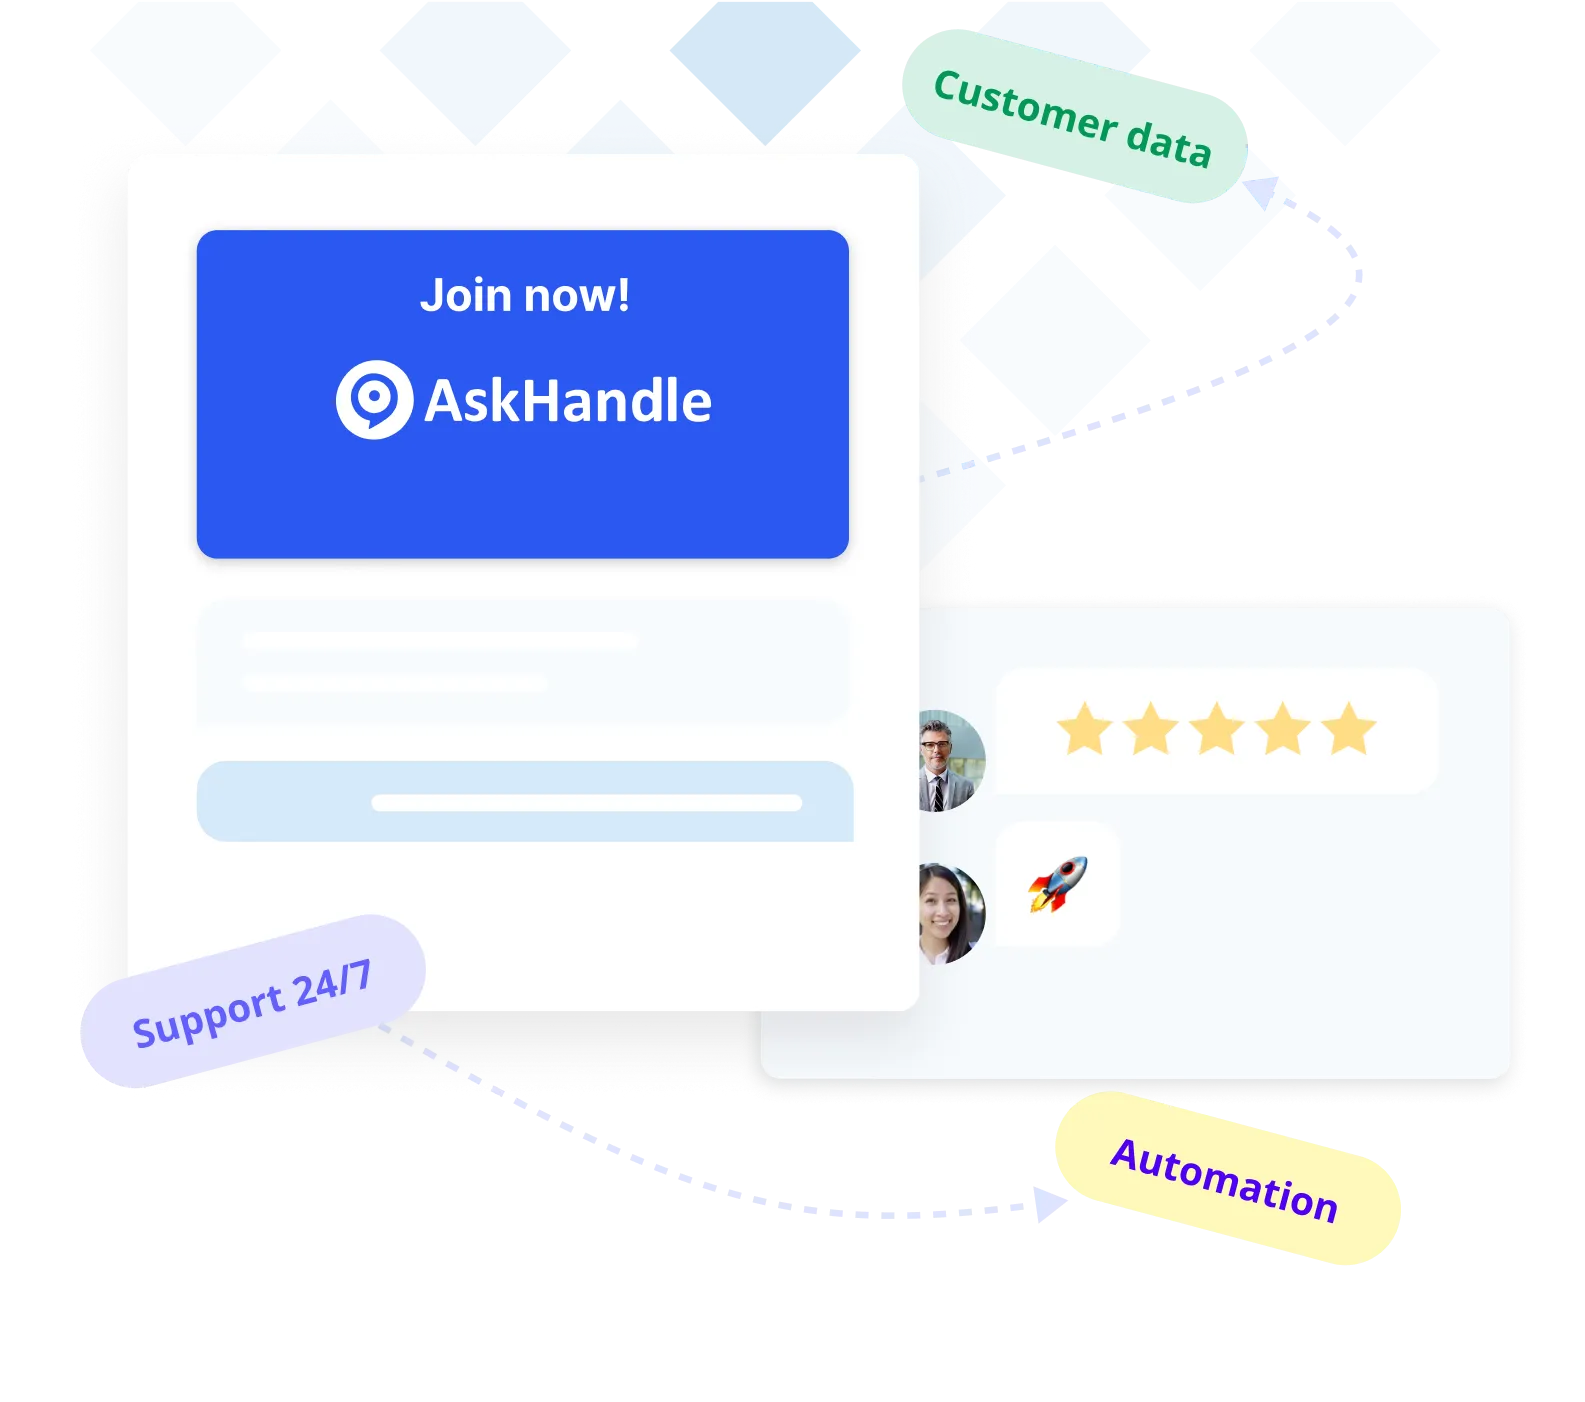 Start using AskHandle today